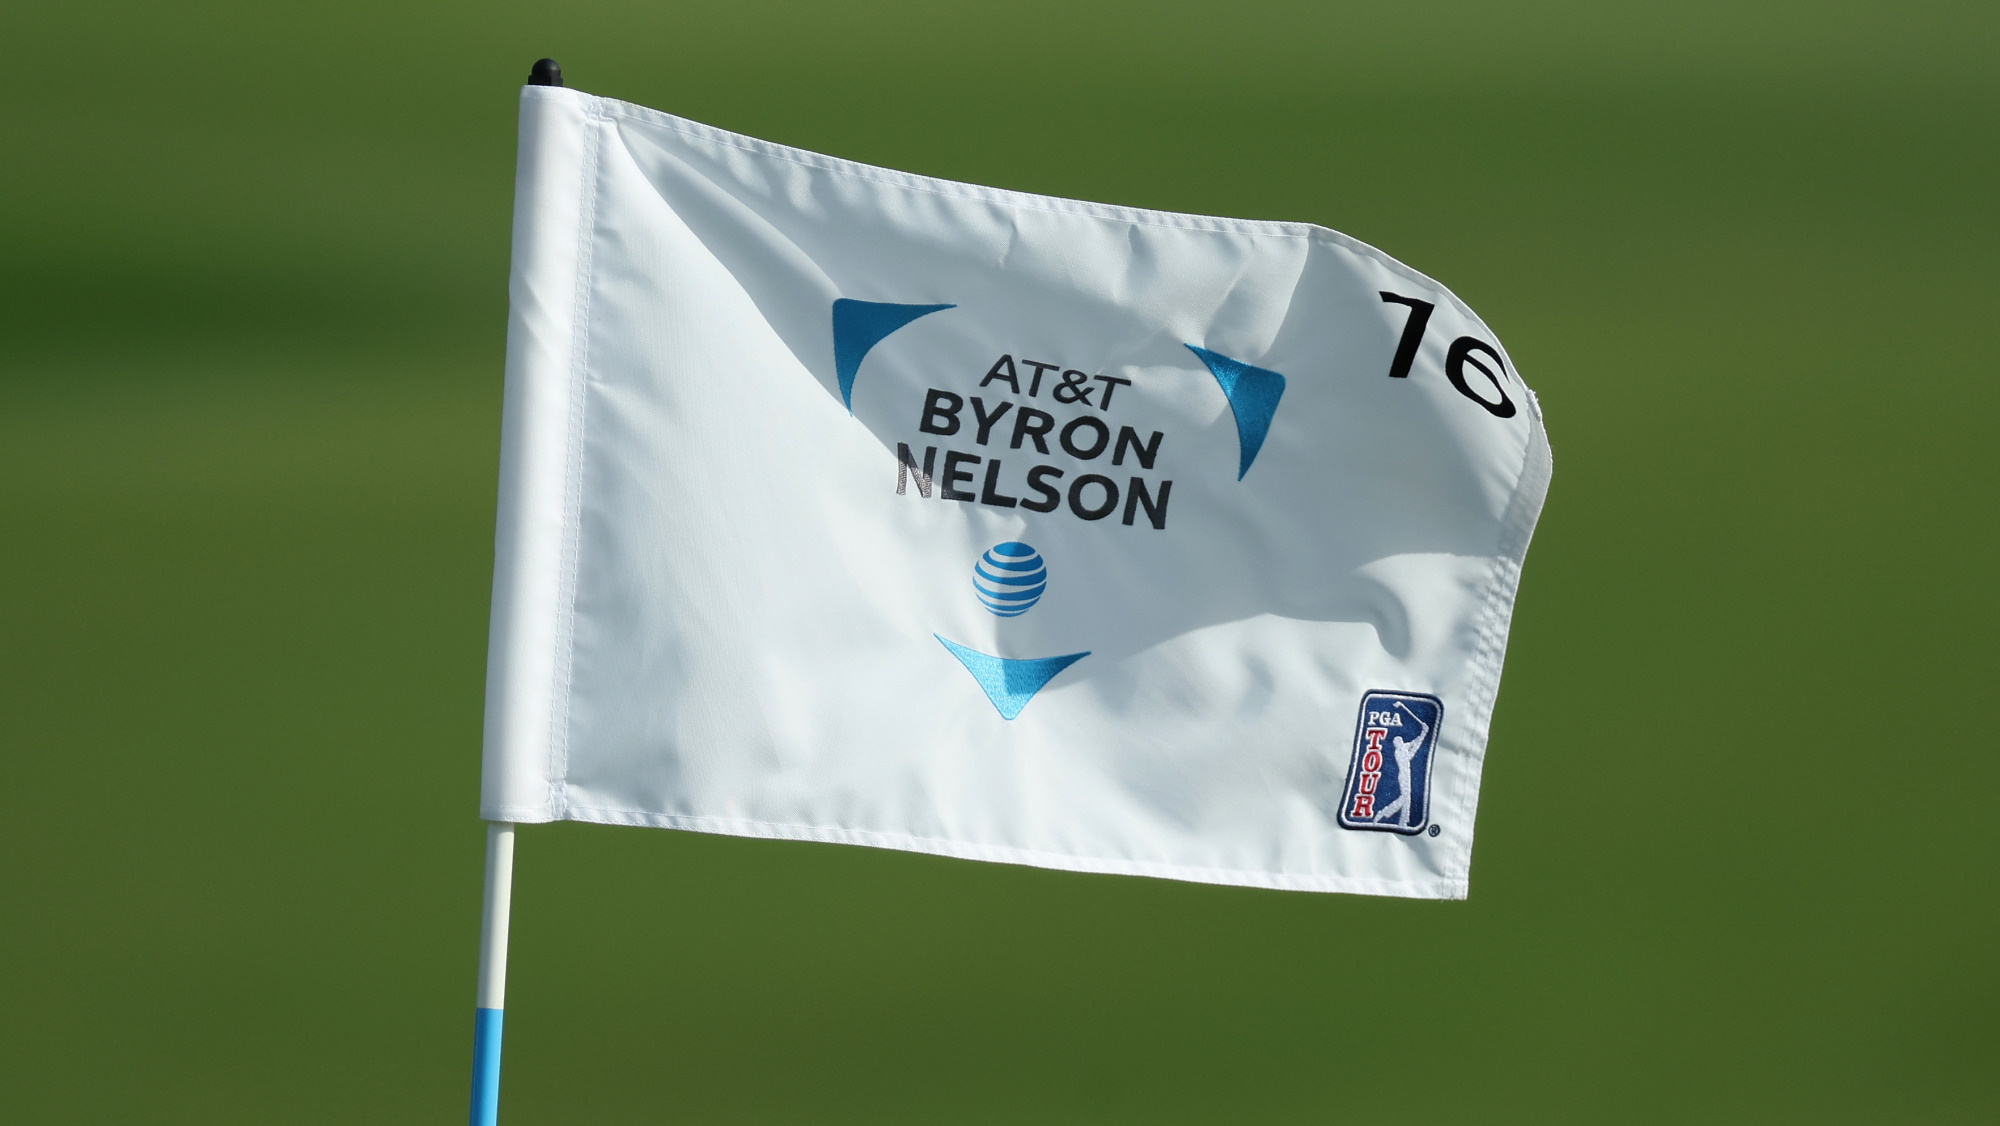 Golf flag at the AT&T Byron Nelson tournament